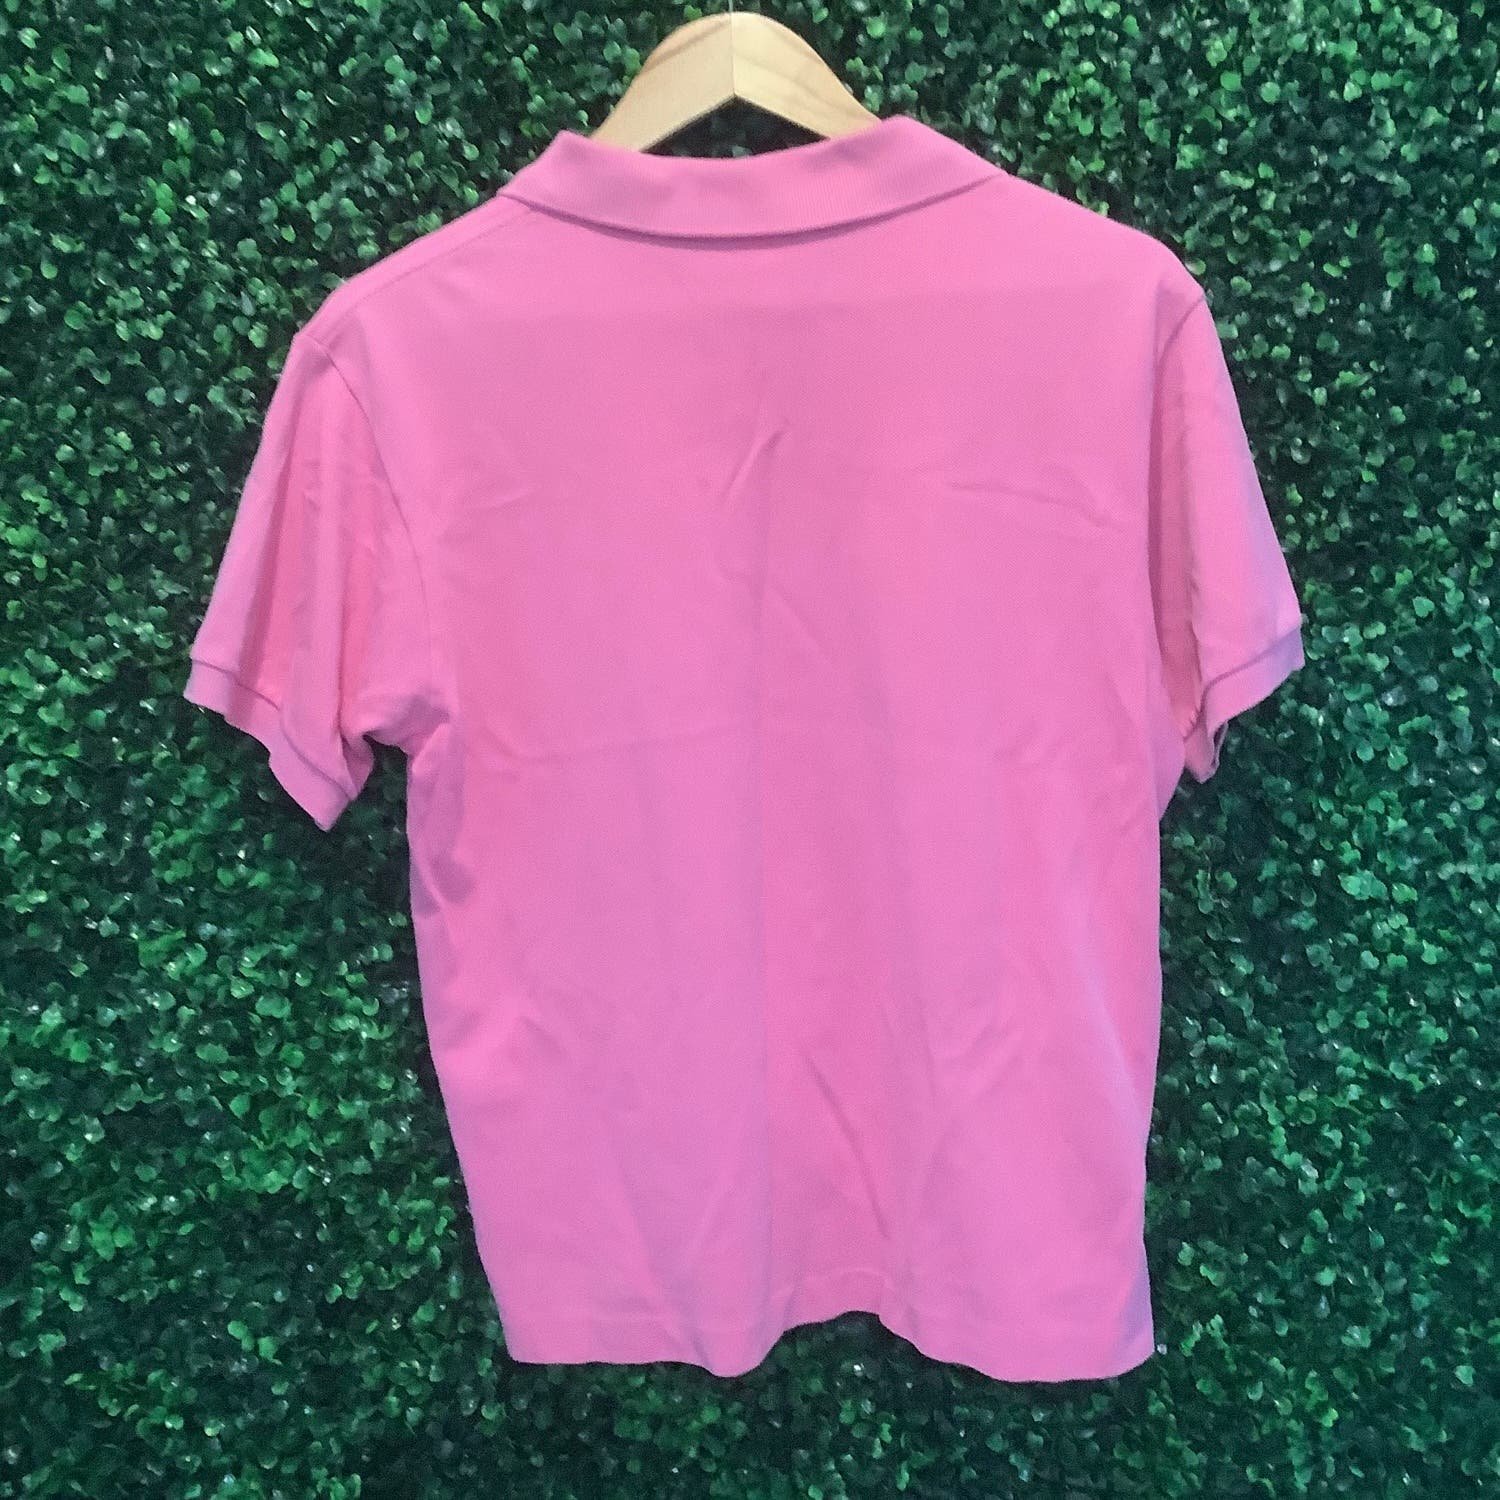 Wholesale price Lacoste Women’s Pink Polo Size 4 I8LAZ4BSf Everyday Low Prices